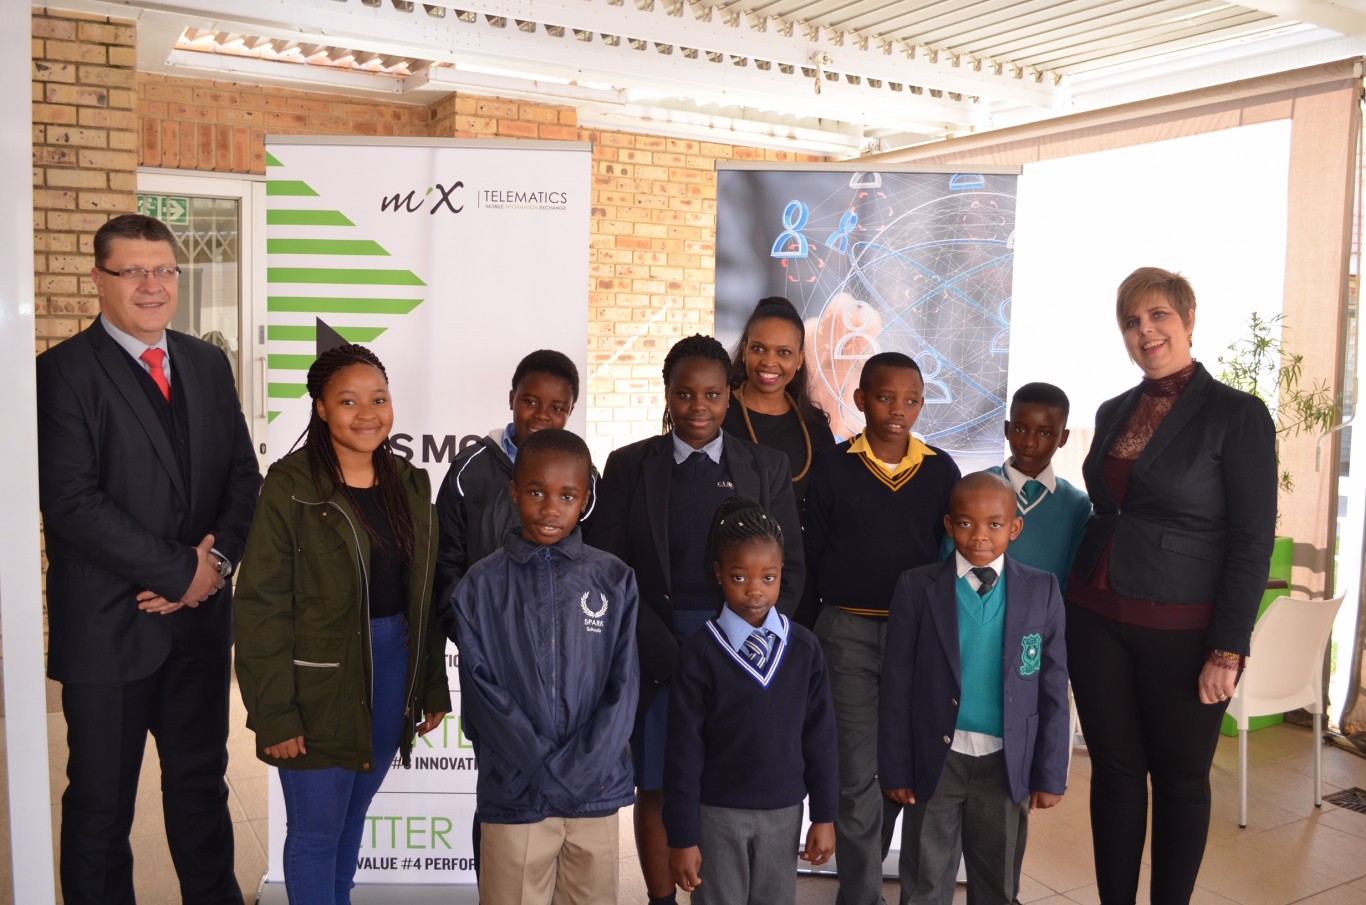 Top achievers from the MiX Telematics Enterprise BEE Trust celebrated